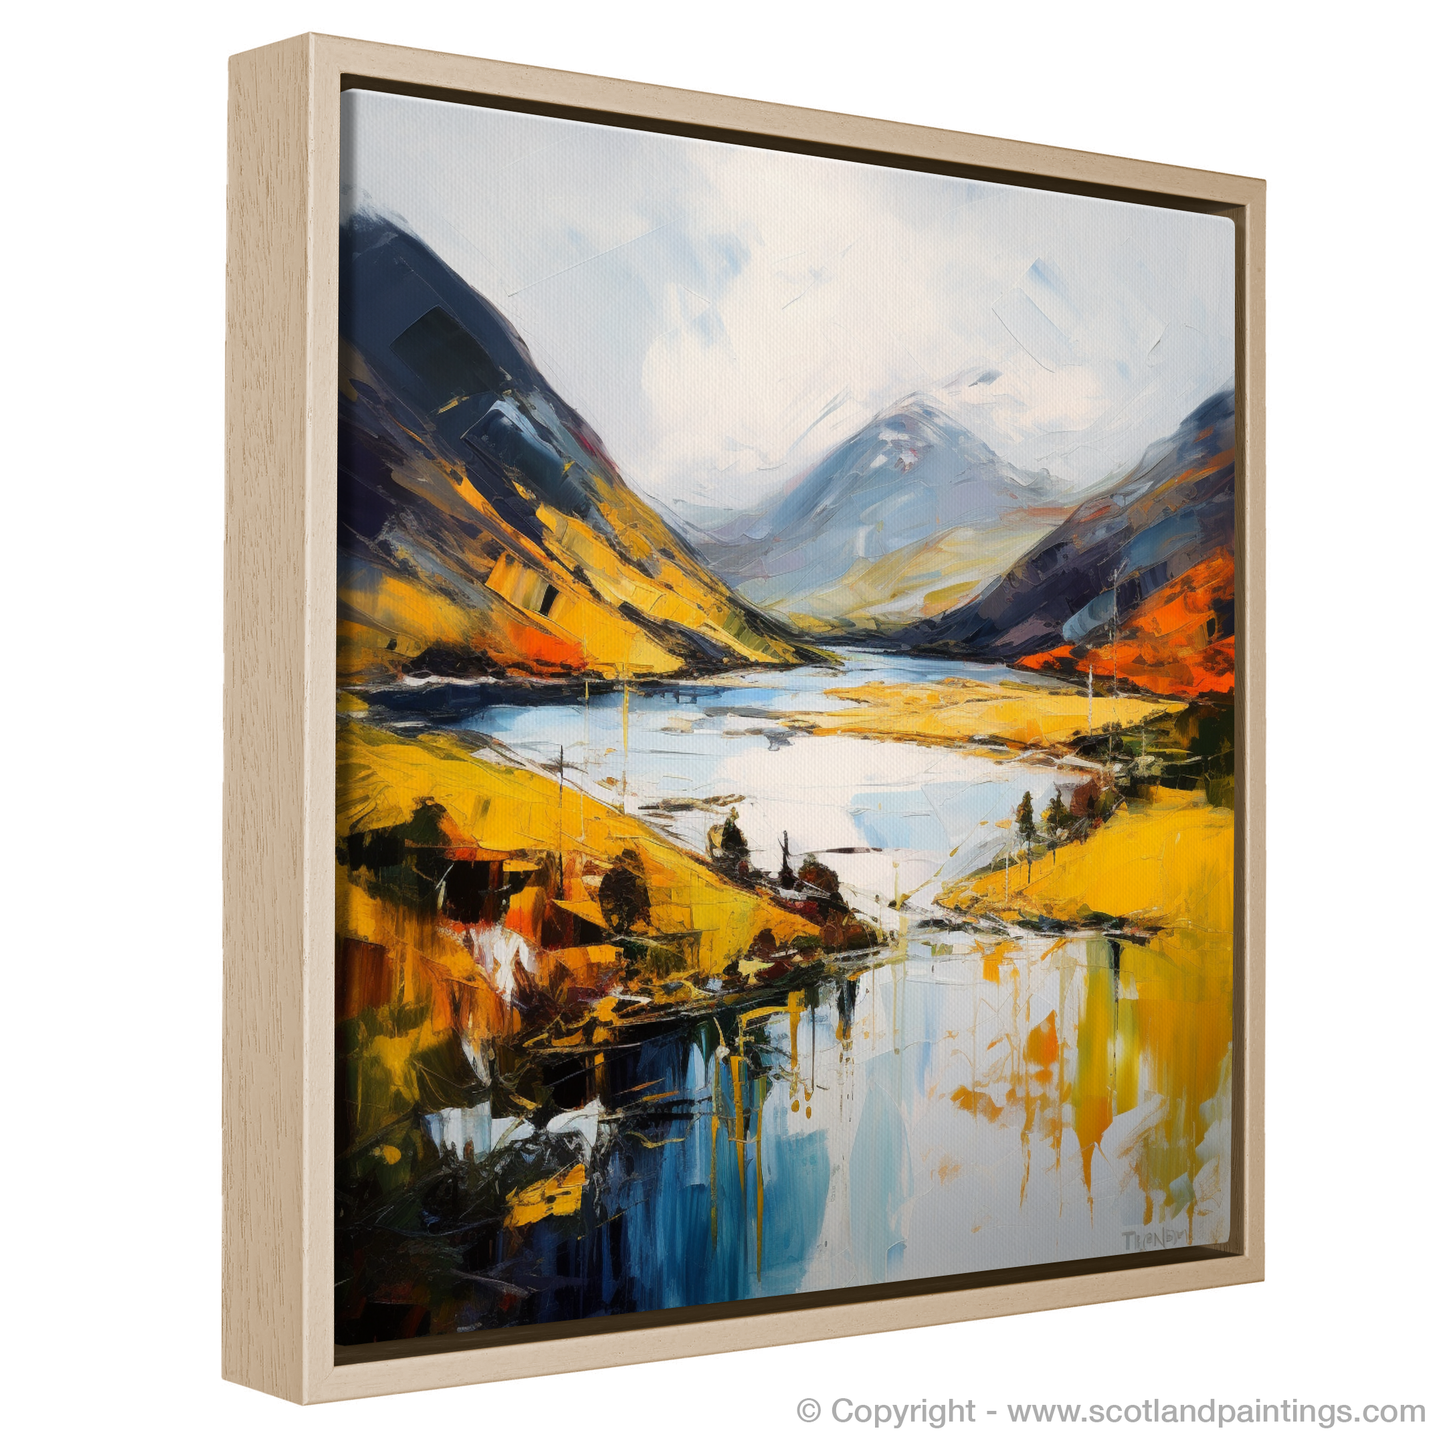 Painting and Art Print of Loch Shiel, Highlands entitled "Highland Symphony: An Expressionist Ode to Loch Shiel".